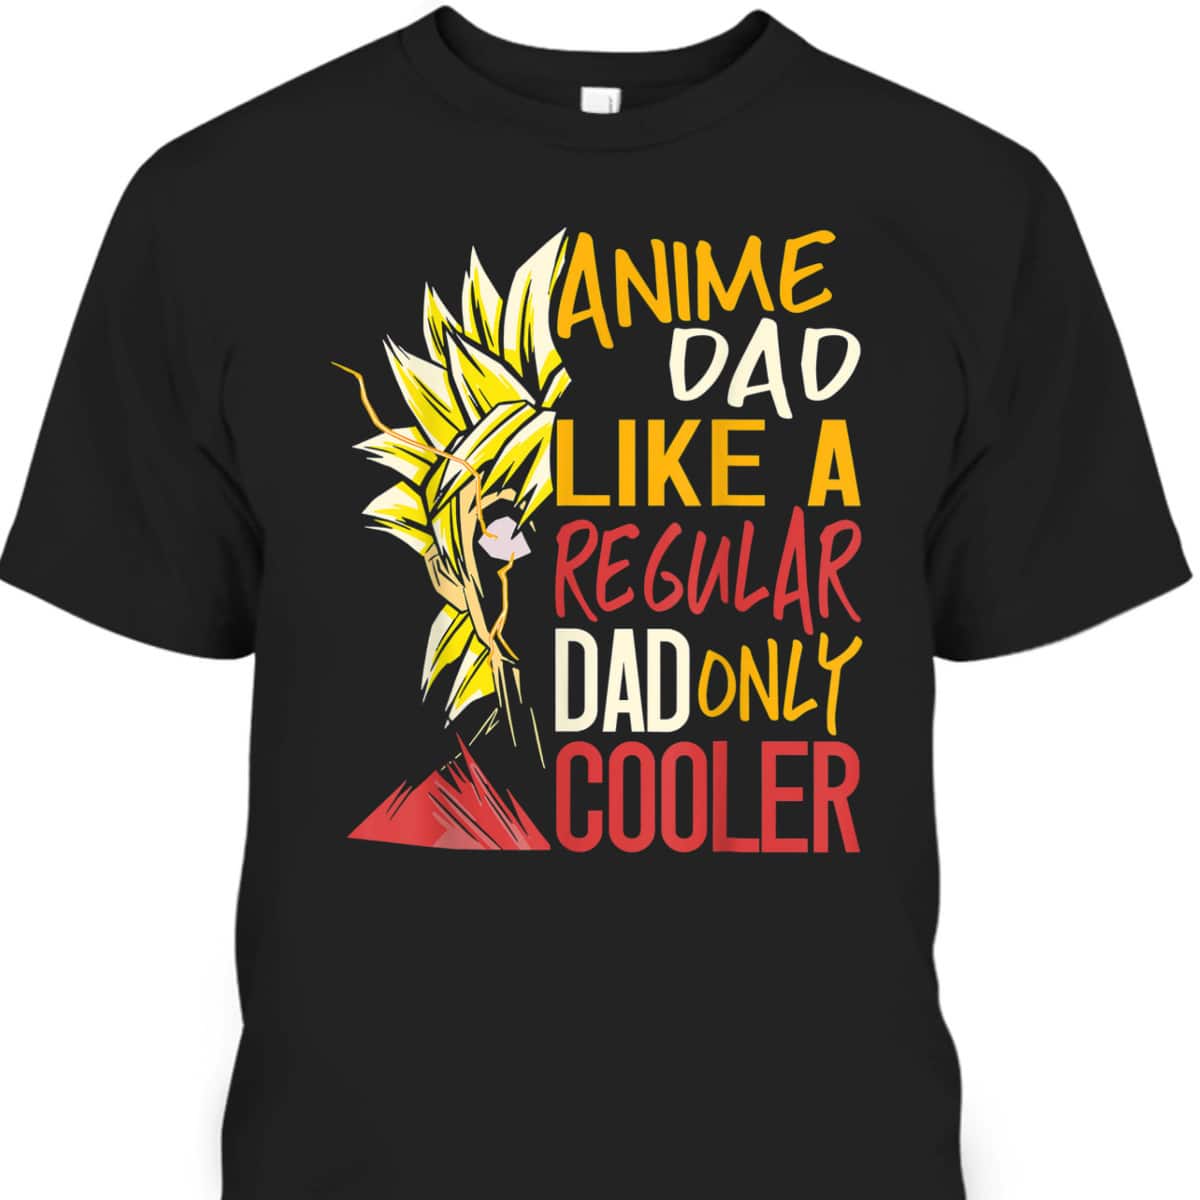 Otaku Anime Dad Like A Regular Dad Only Cooler Father's Day T-Shirt